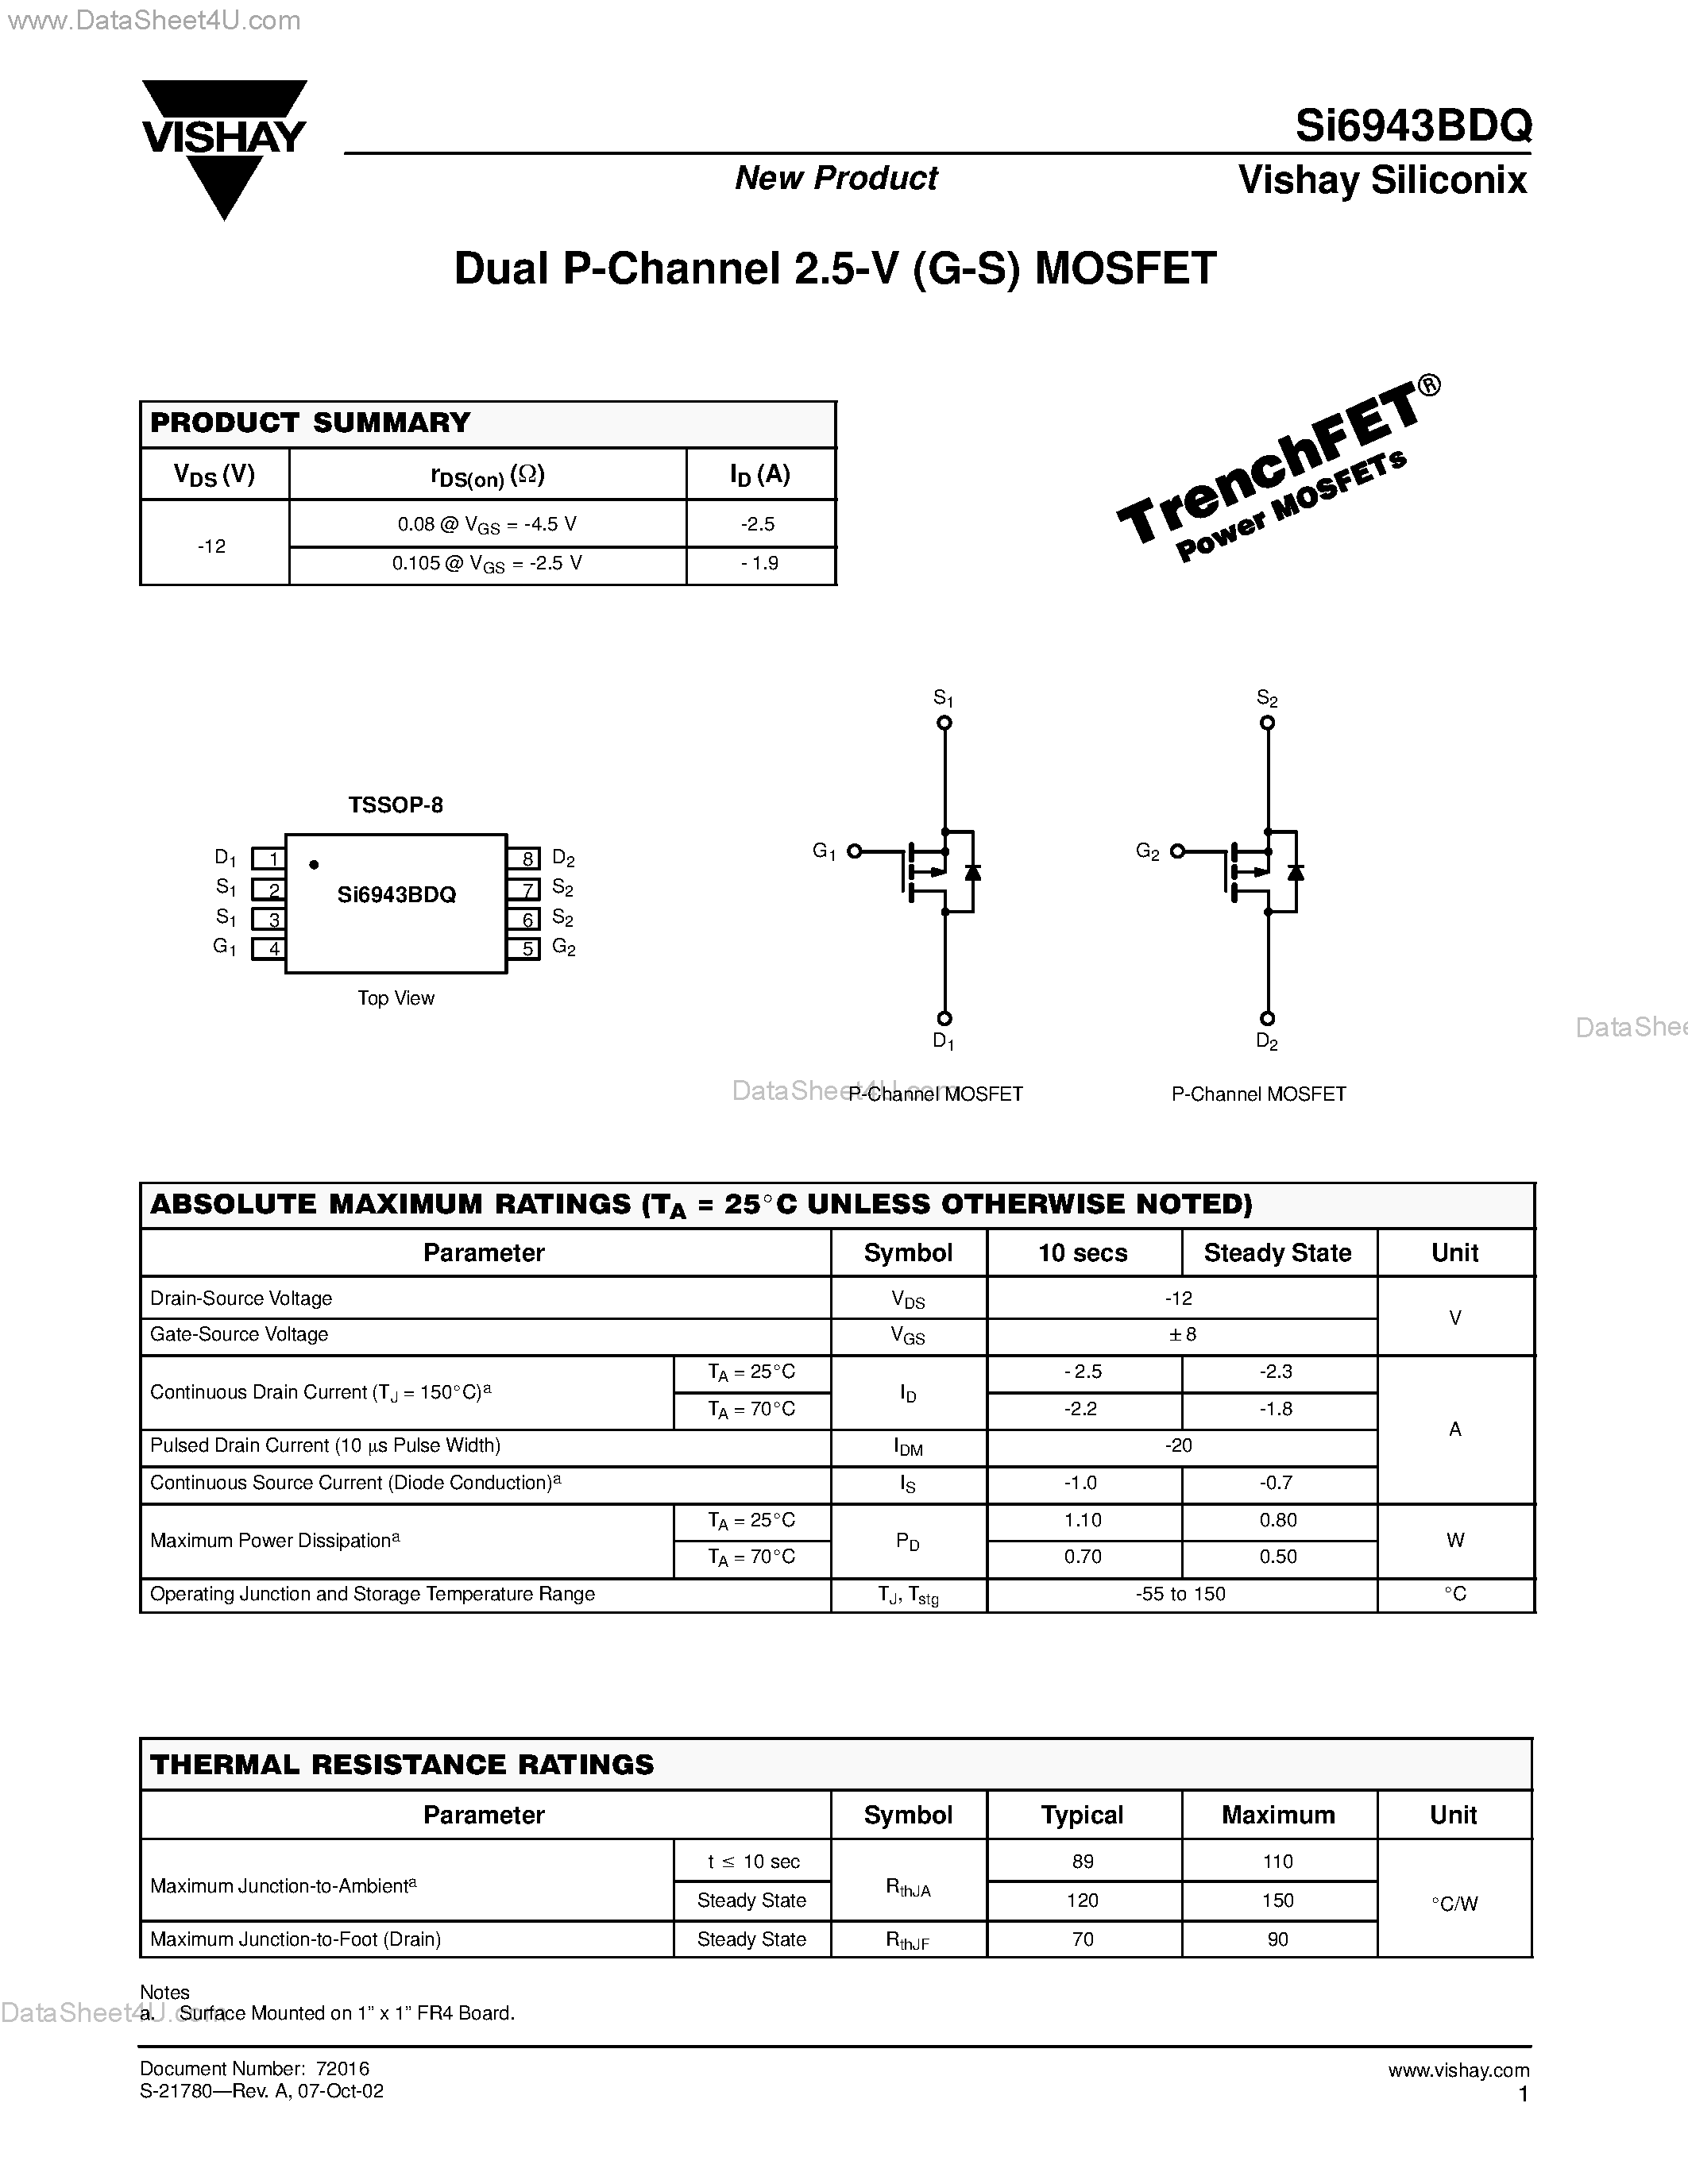 Datasheet SI6943BDQ - Dual P-Channel 2.5-V (G-S) MOSFET page 1